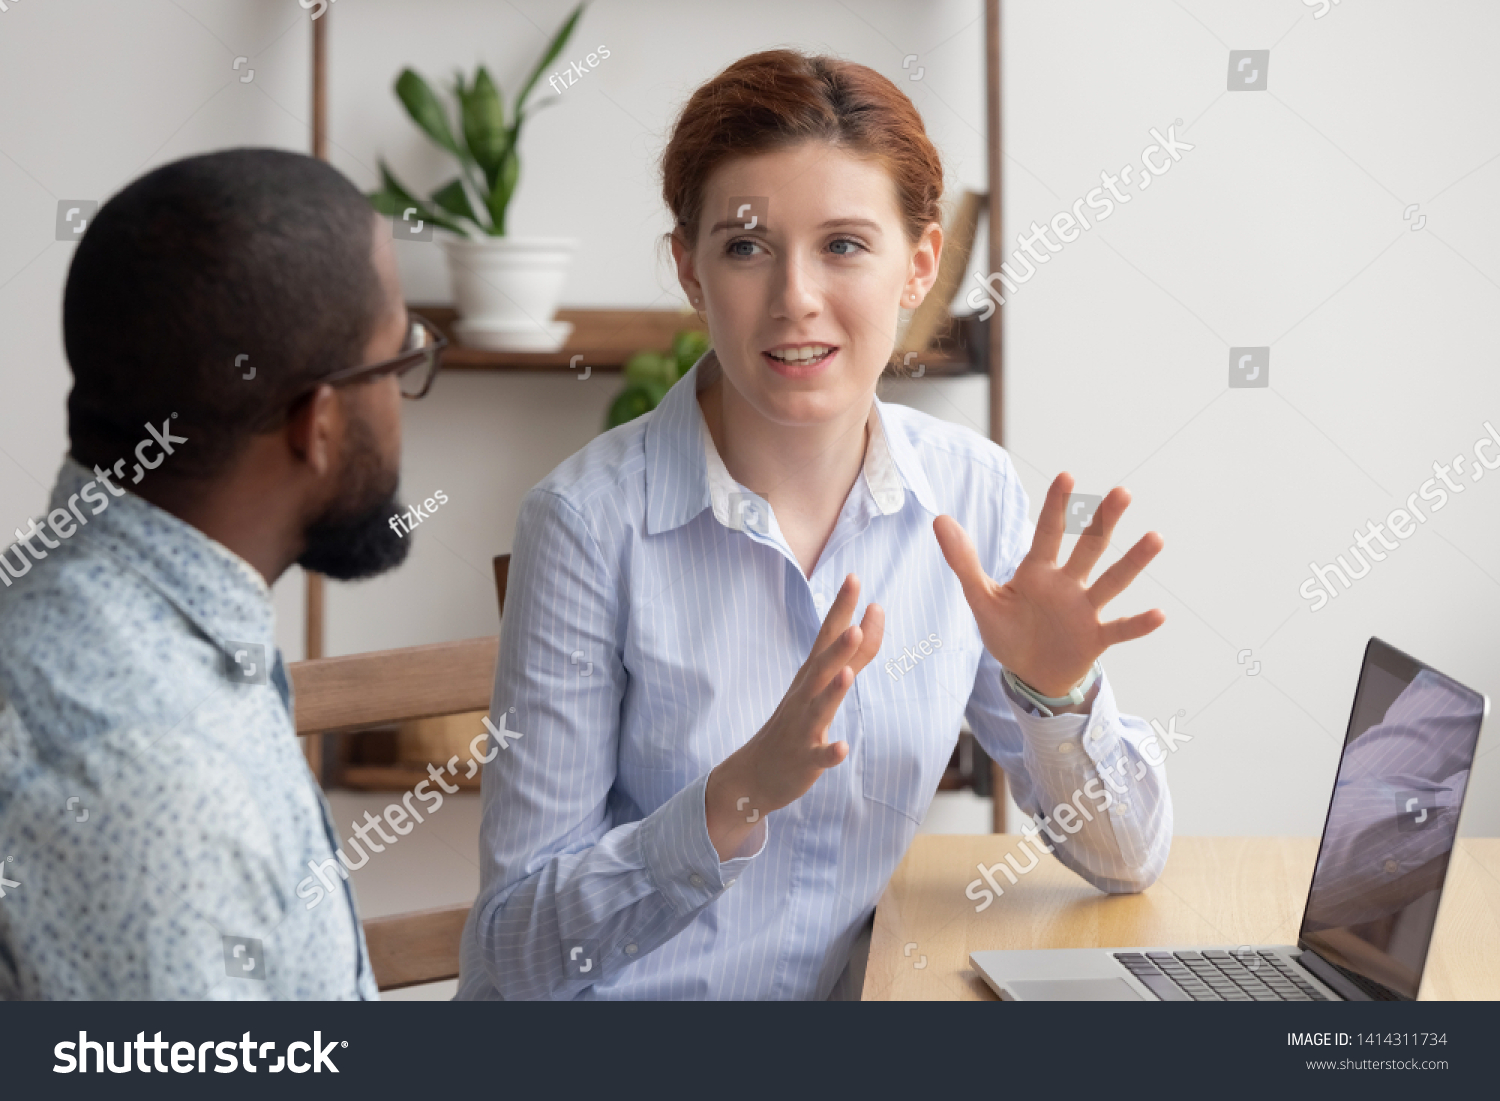 Two diverse businesspeople chatting sitting behind laptop in office. Excited caucasian female sharing ideas or startup business plan with black male coworker. Informal conversation, work break concept